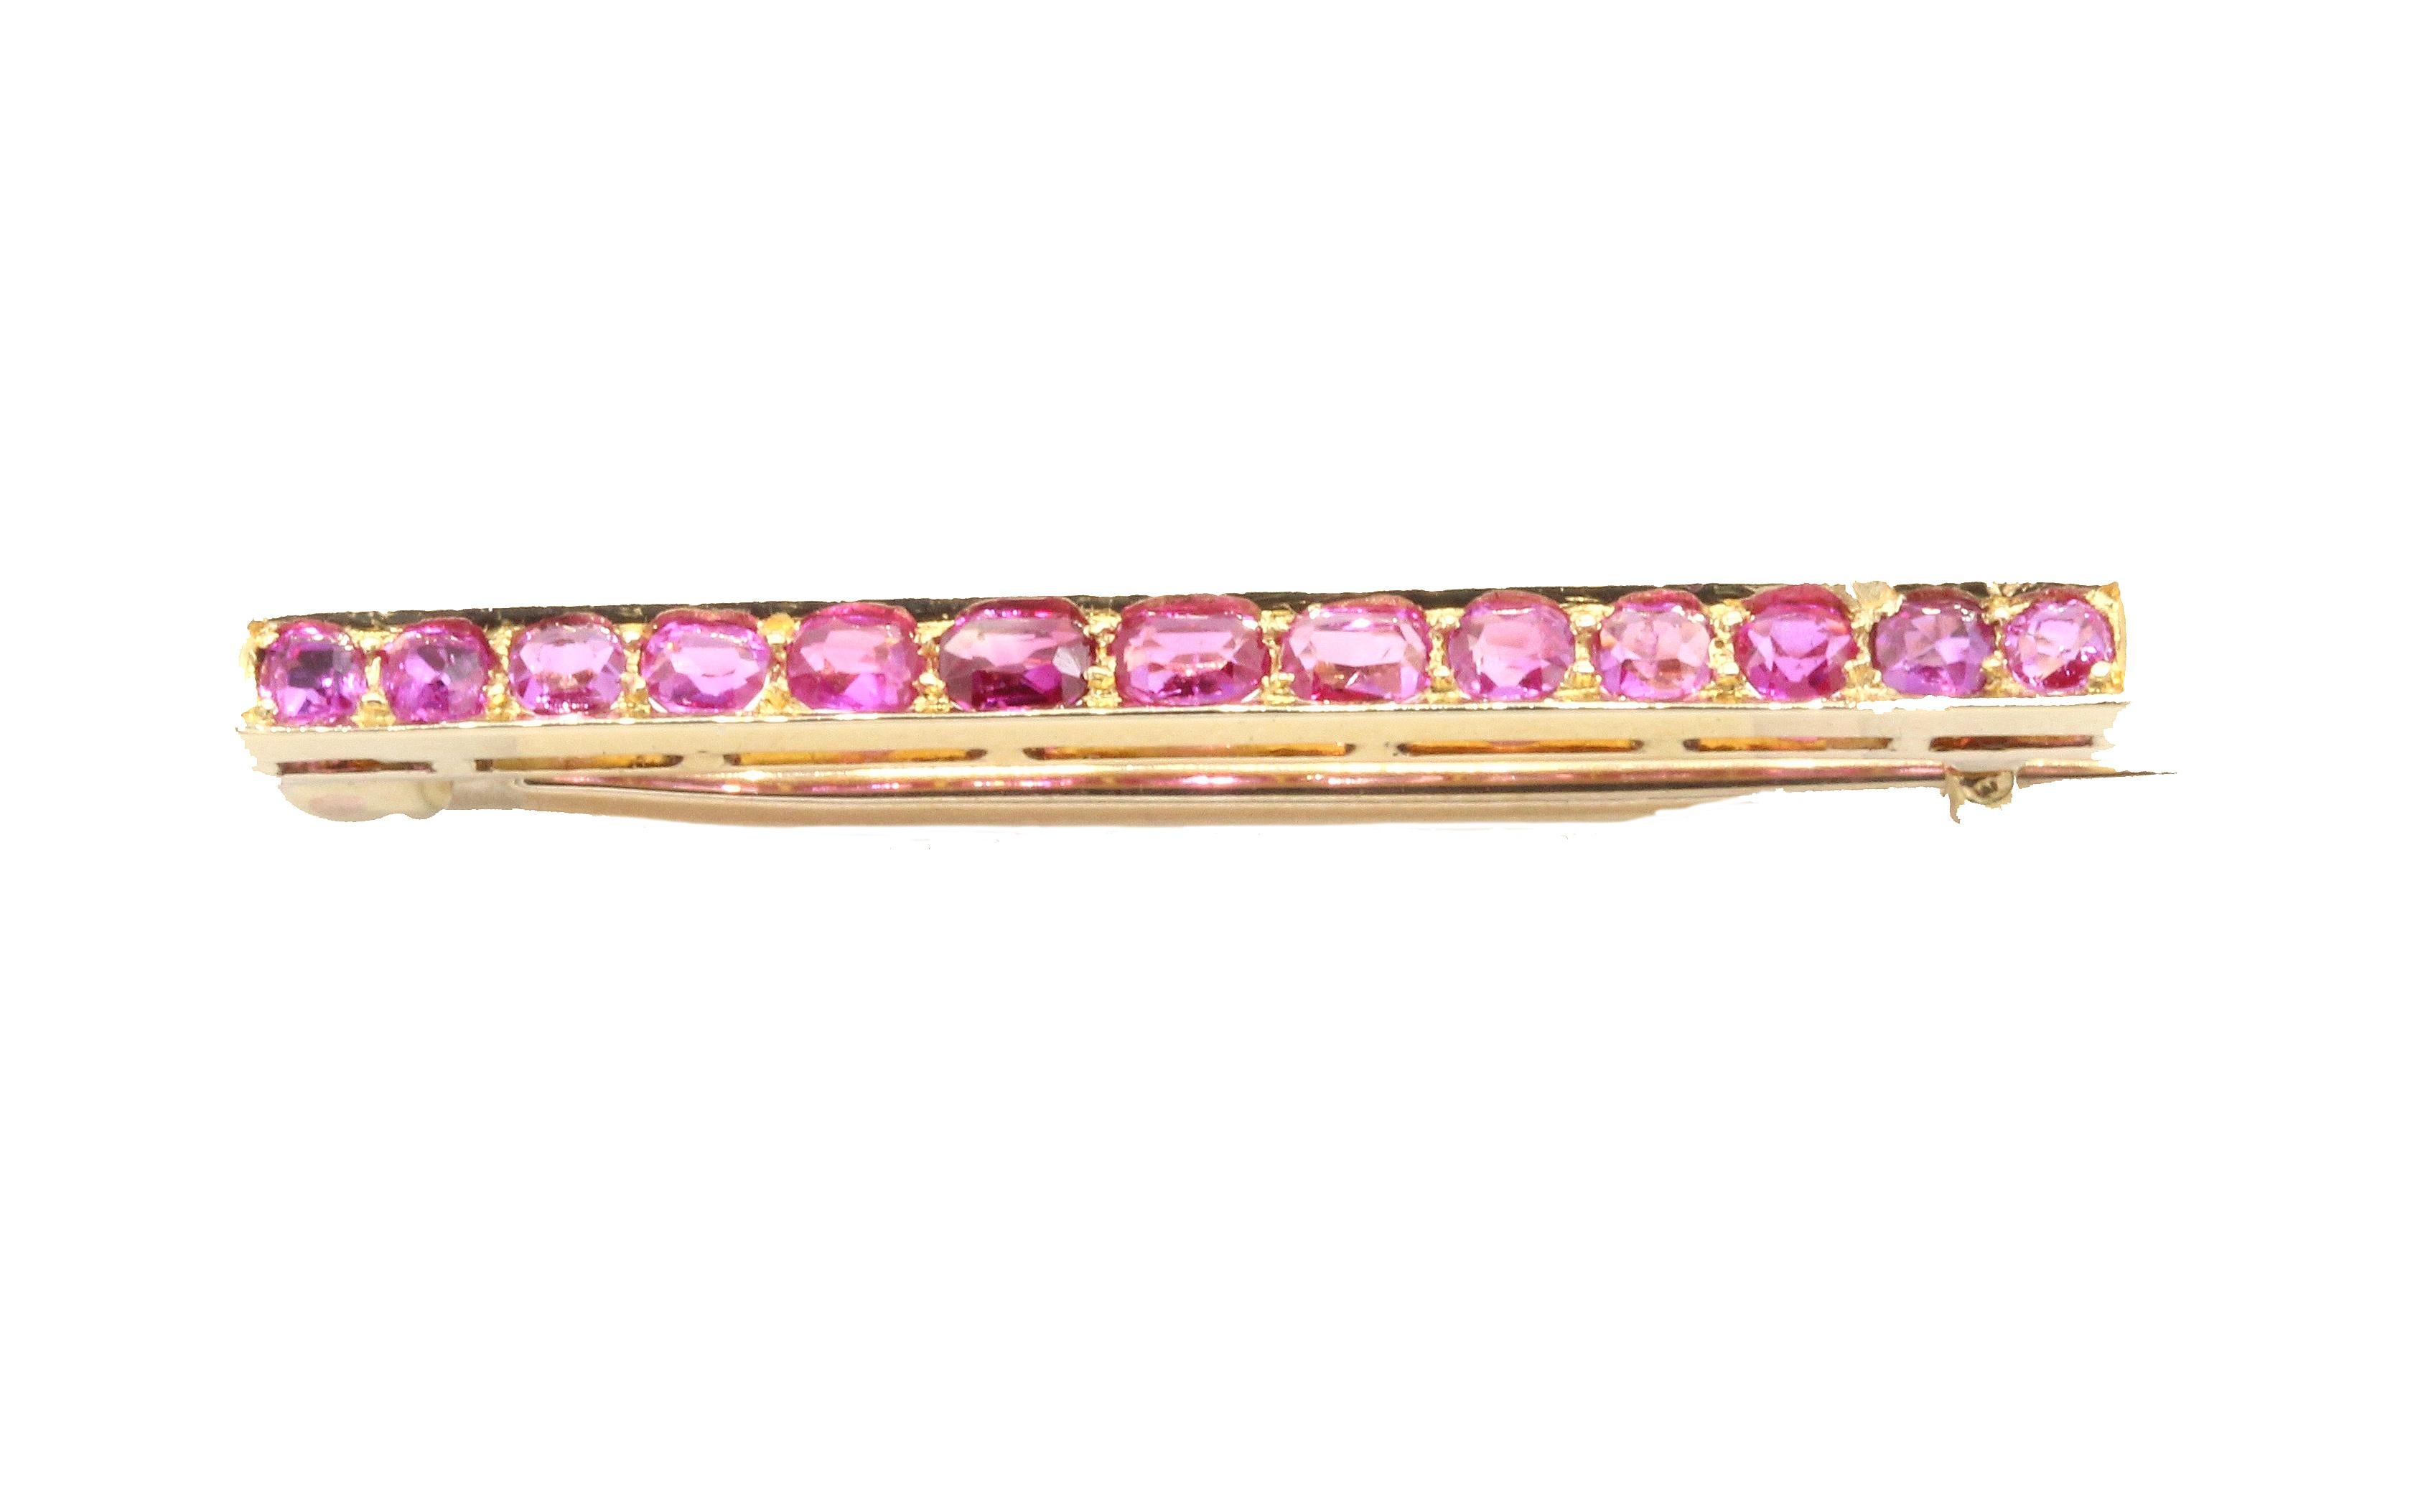 A 14 Kt Rose Gold & Ruby tie pin, with thirteen rubies set in a horizontal bar.